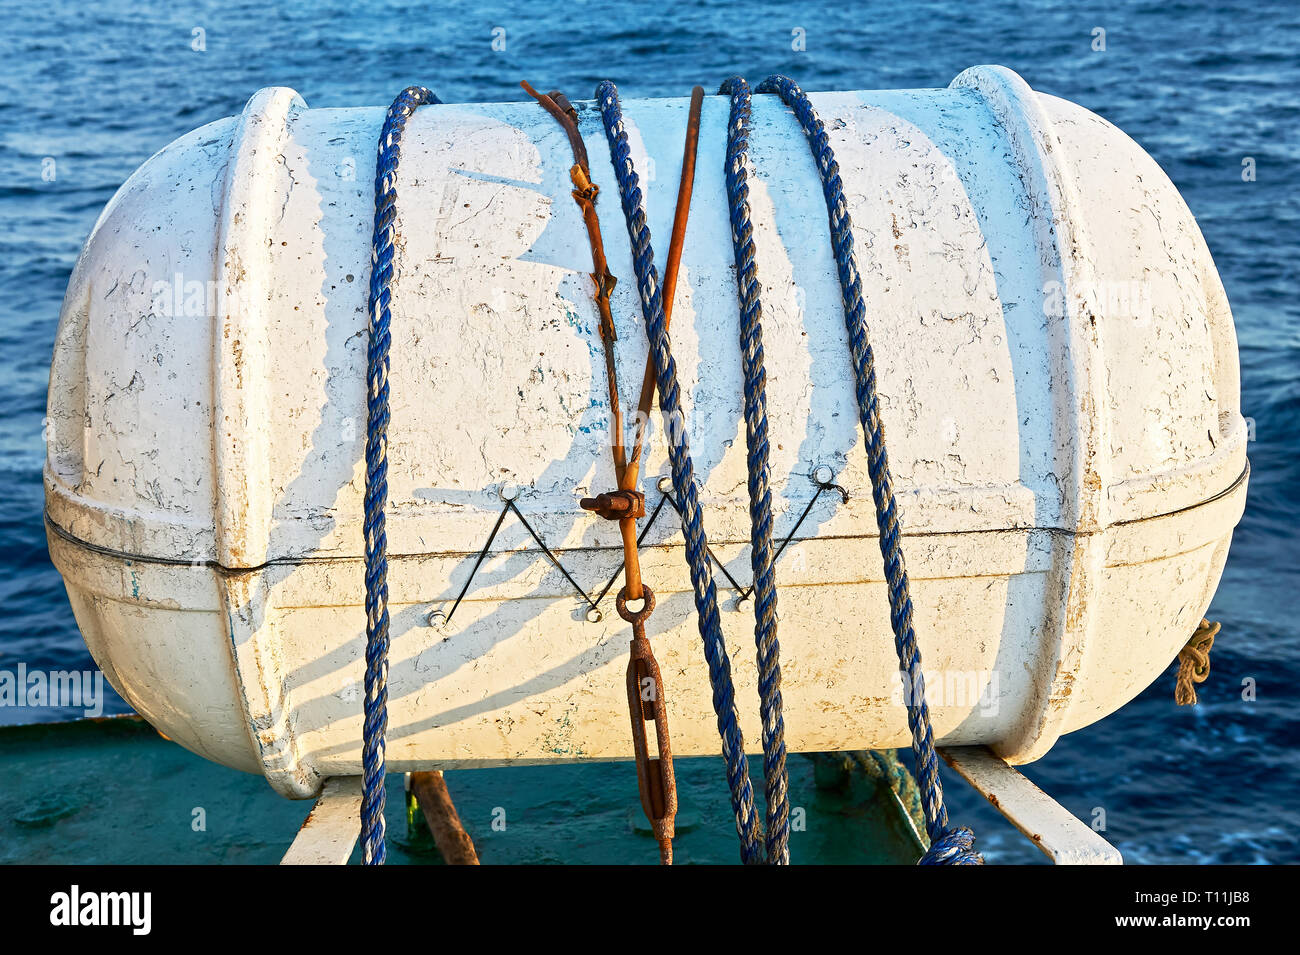 Close-up of an old white colored inflatable life raft capsule held by ropes on deck of an inter-island ship in Asia Stock Photo